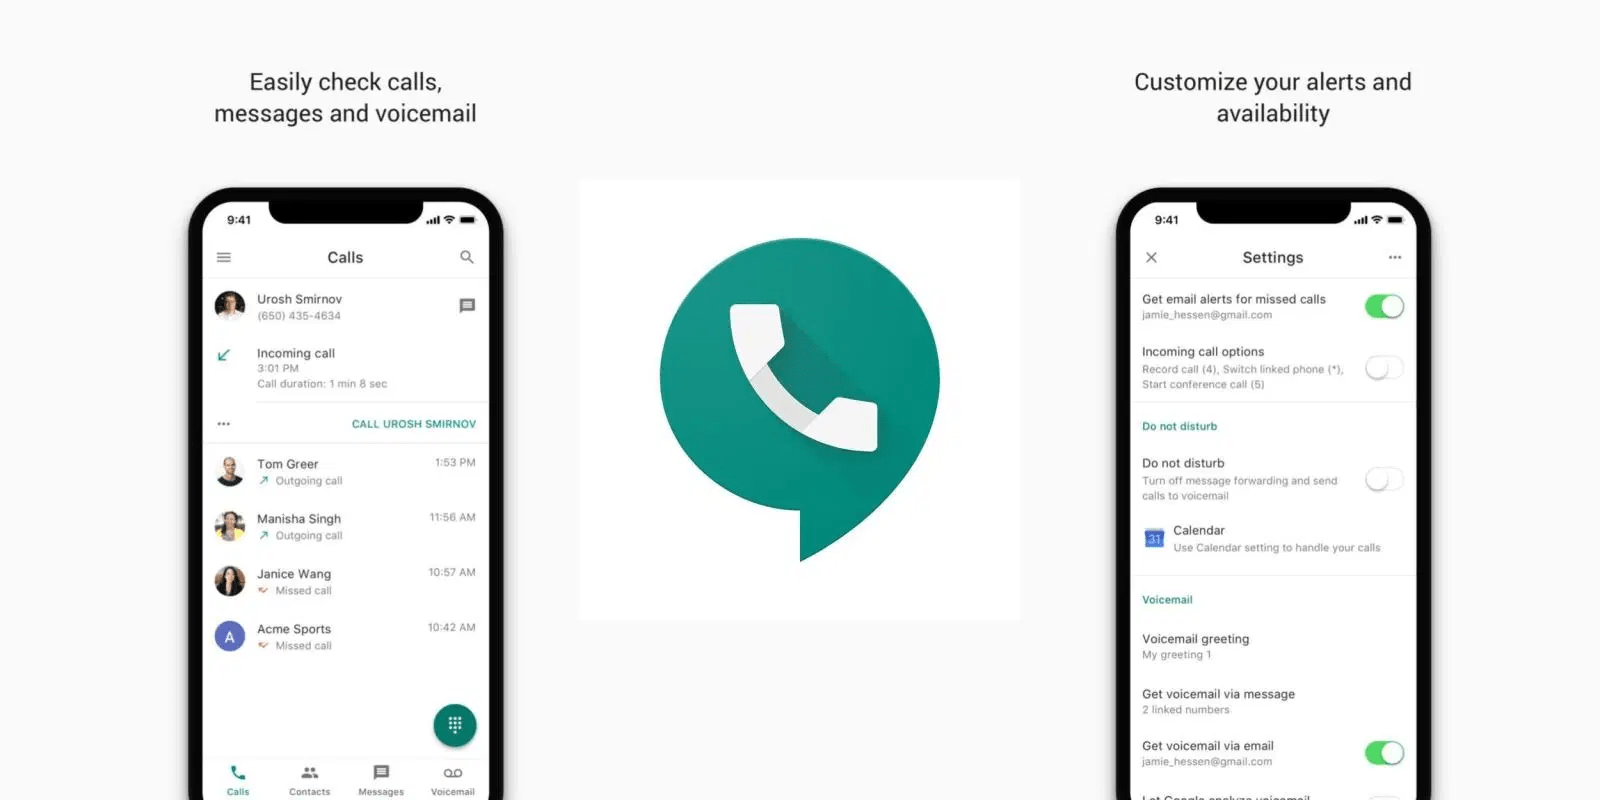 using google voice for text on messages app mac